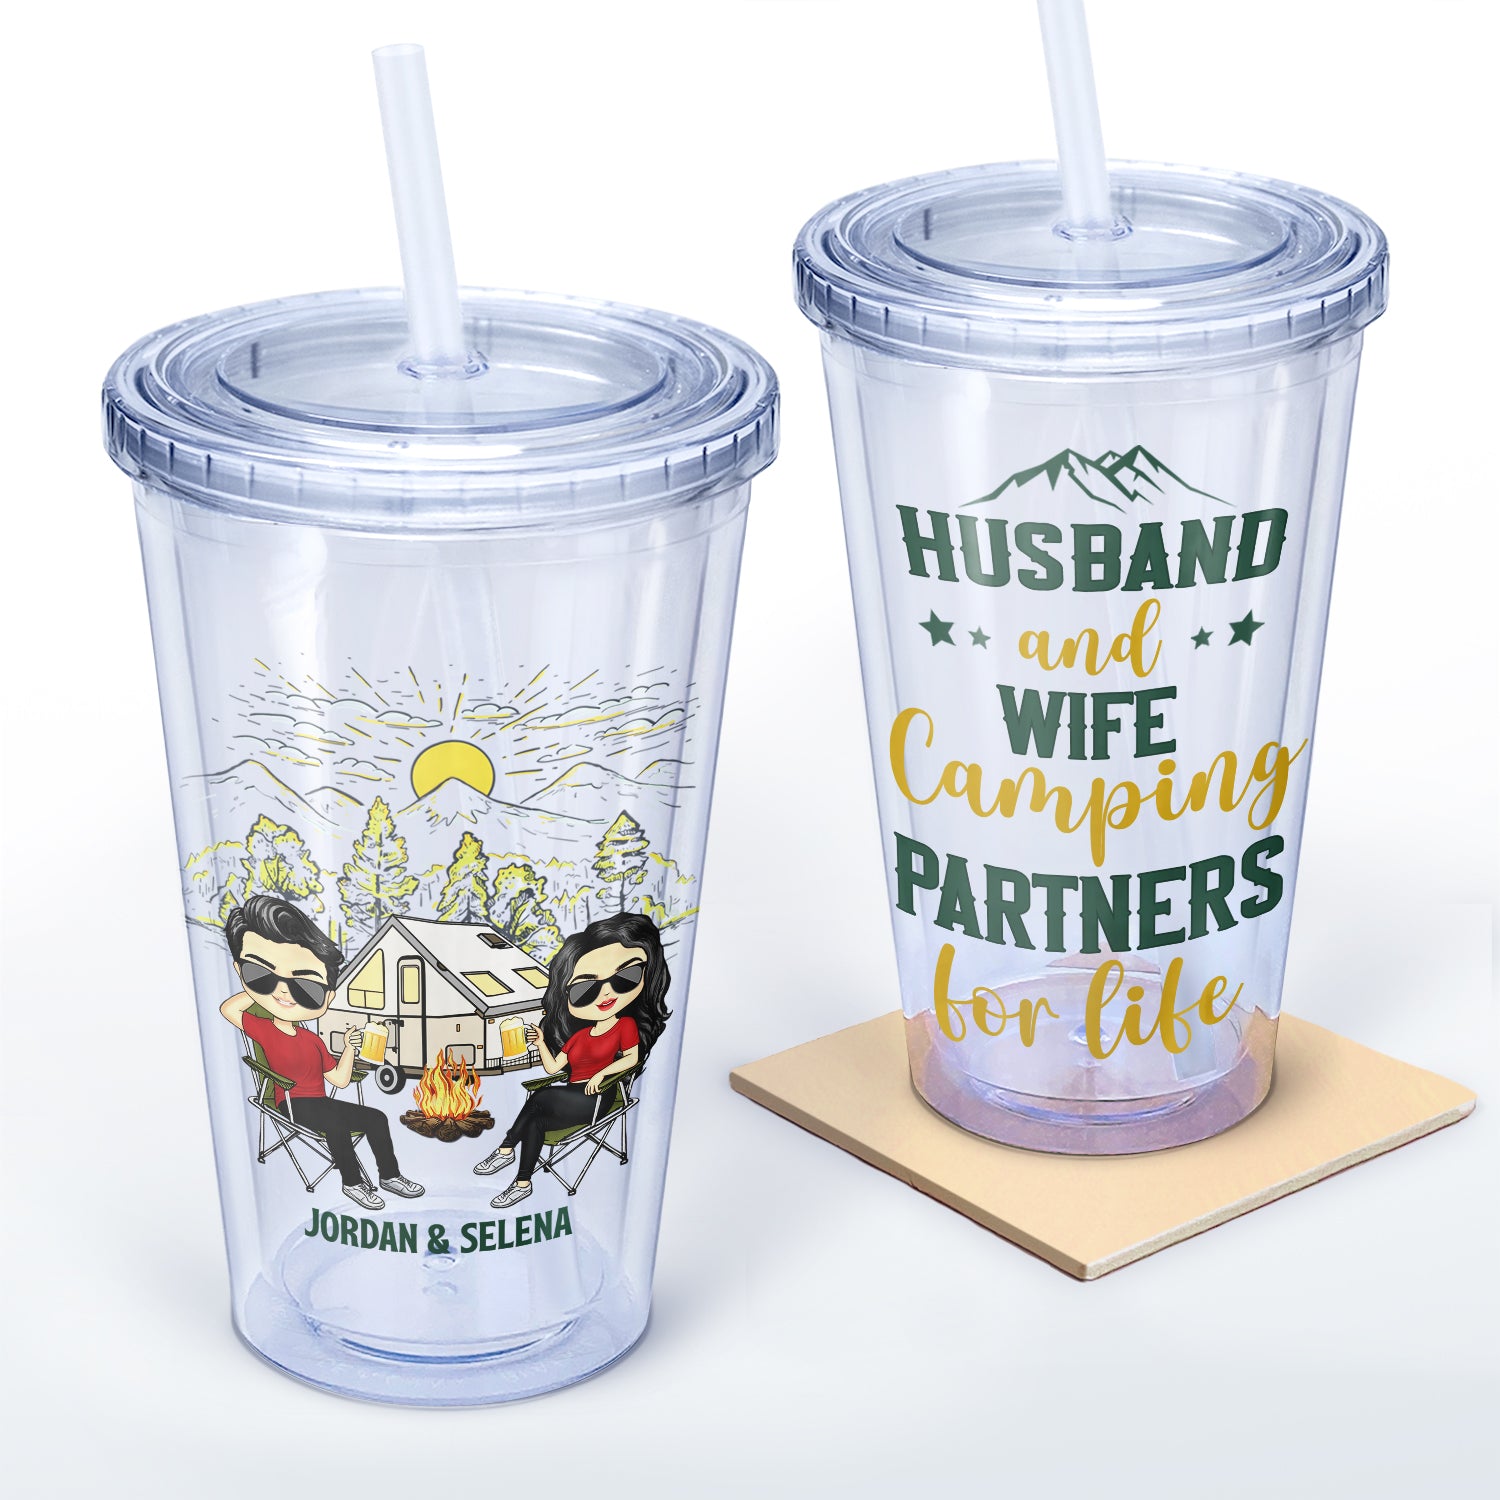 Husband And Wife Camping Partners For Life - Gift For Couples, Husband, Wife, Campers - Personalized Acrylic Insulated Tumbler With Straw